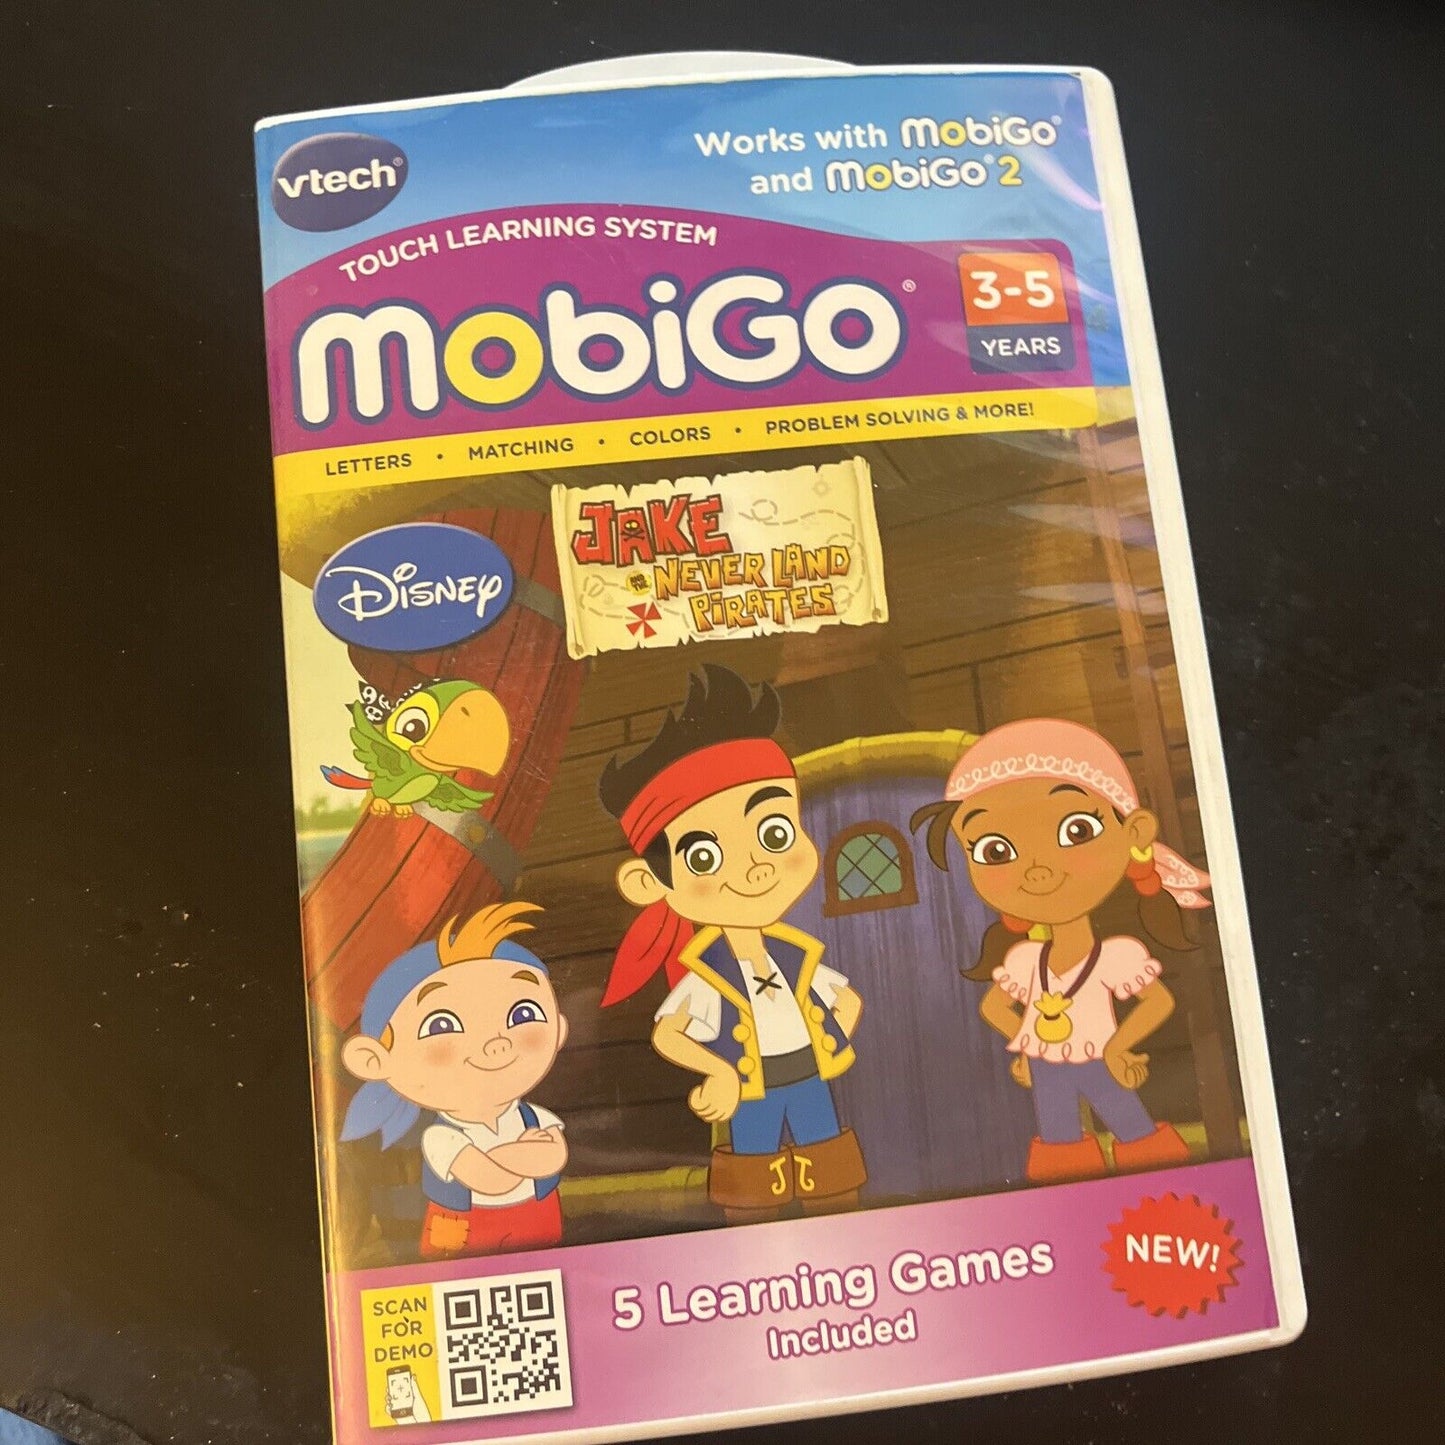 4x Mobigo Games: Mickey Mouse, Scooby-Doo, Jake Never Land Pirates, Toy Story 3